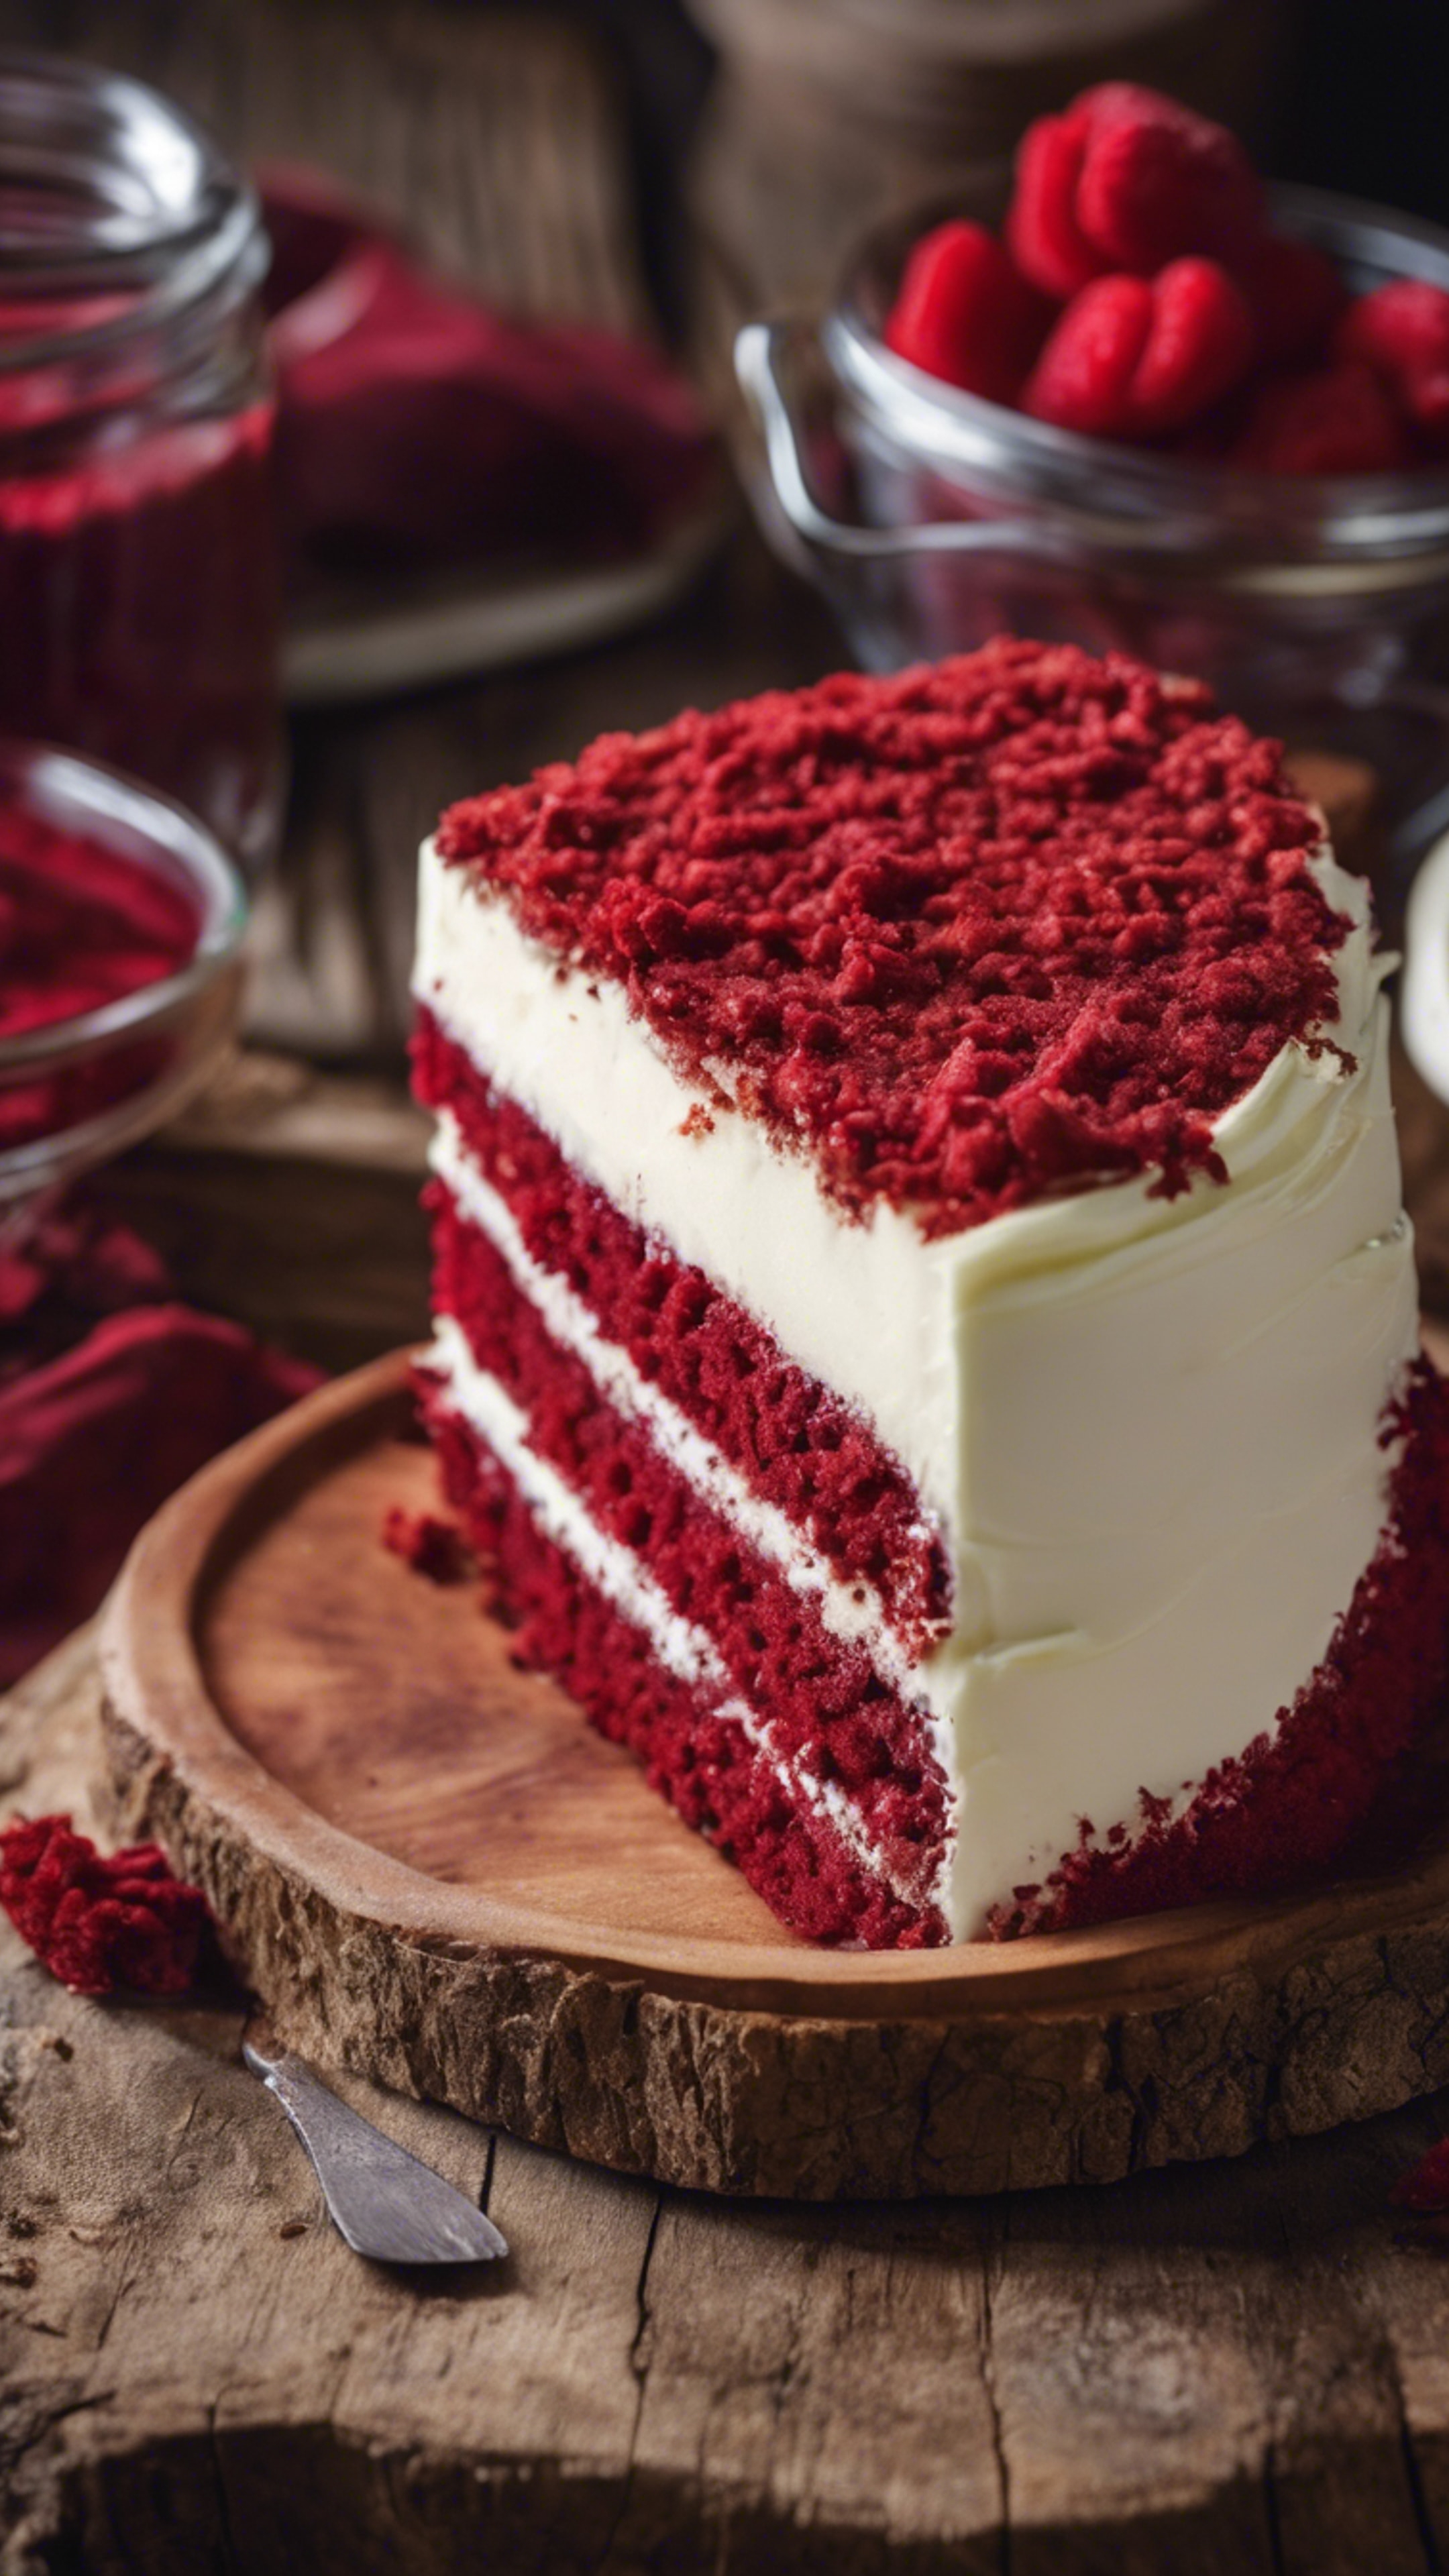 A slice of rich red velvet cake with a layer of cream cheese frosting, placed on a rustic wooden table. Tapet[5b147ad1f433484e86de]